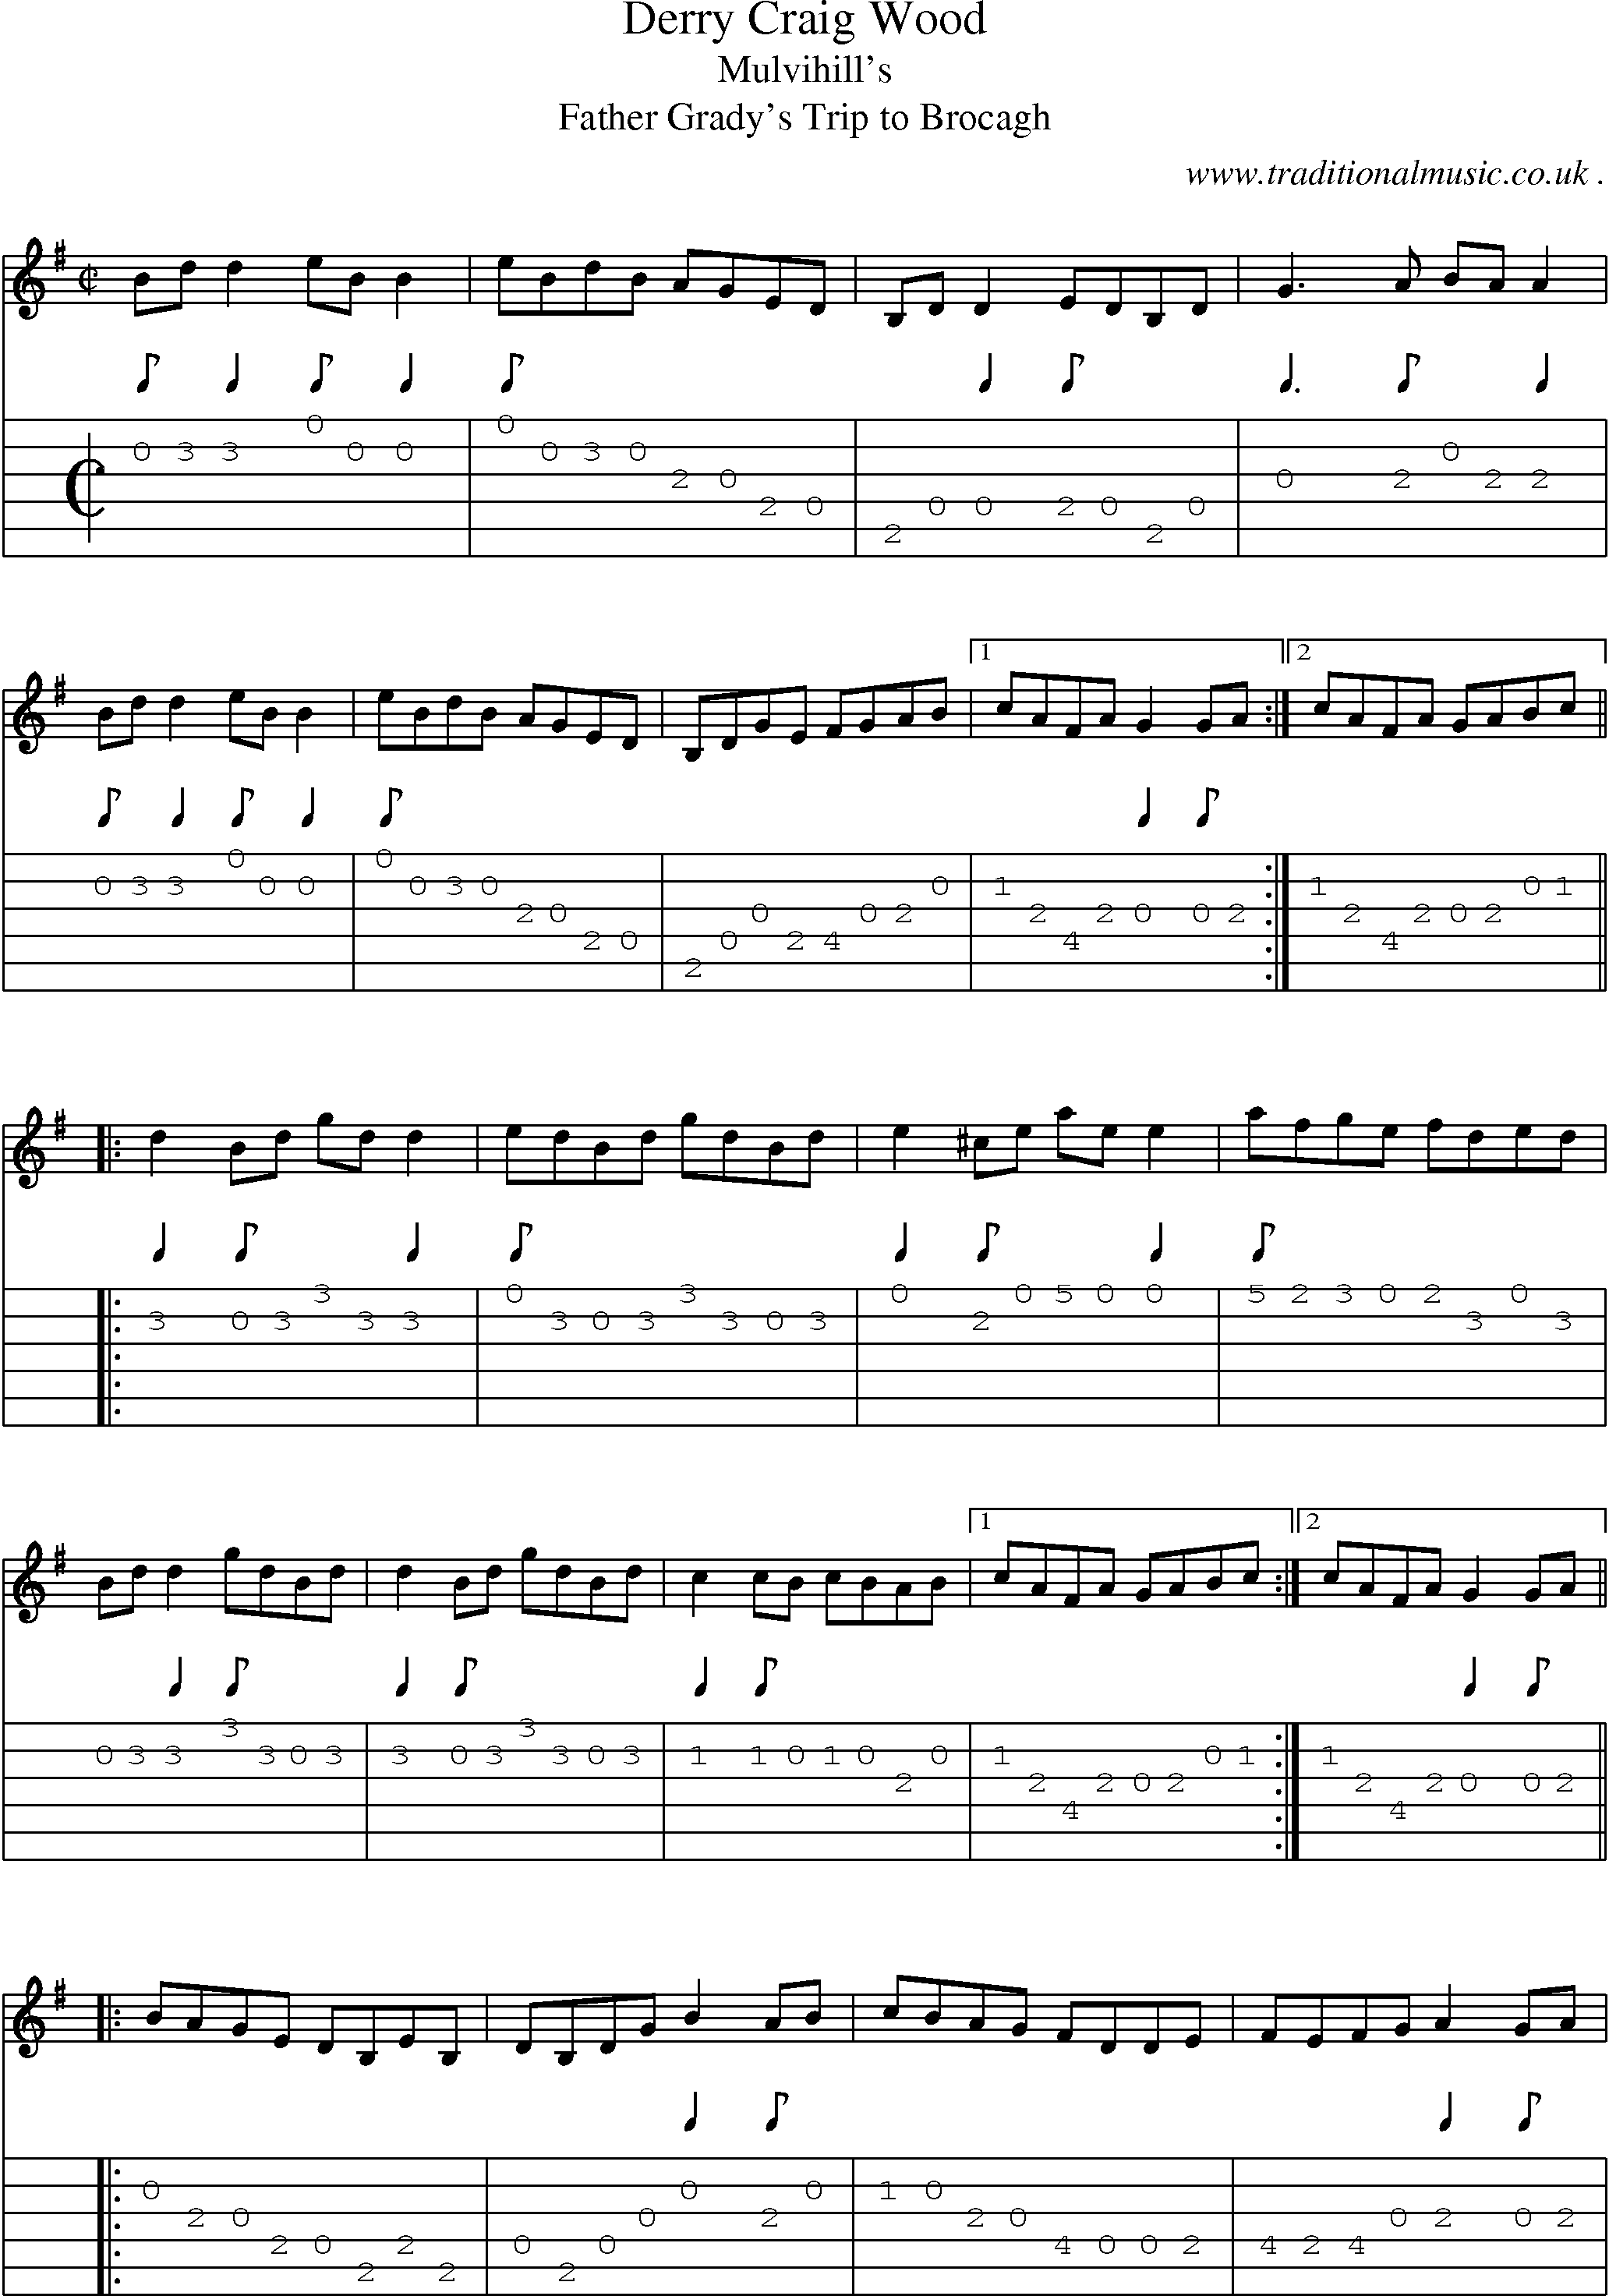 Sheet-Music and Guitar Tabs for Derry Craig Wood